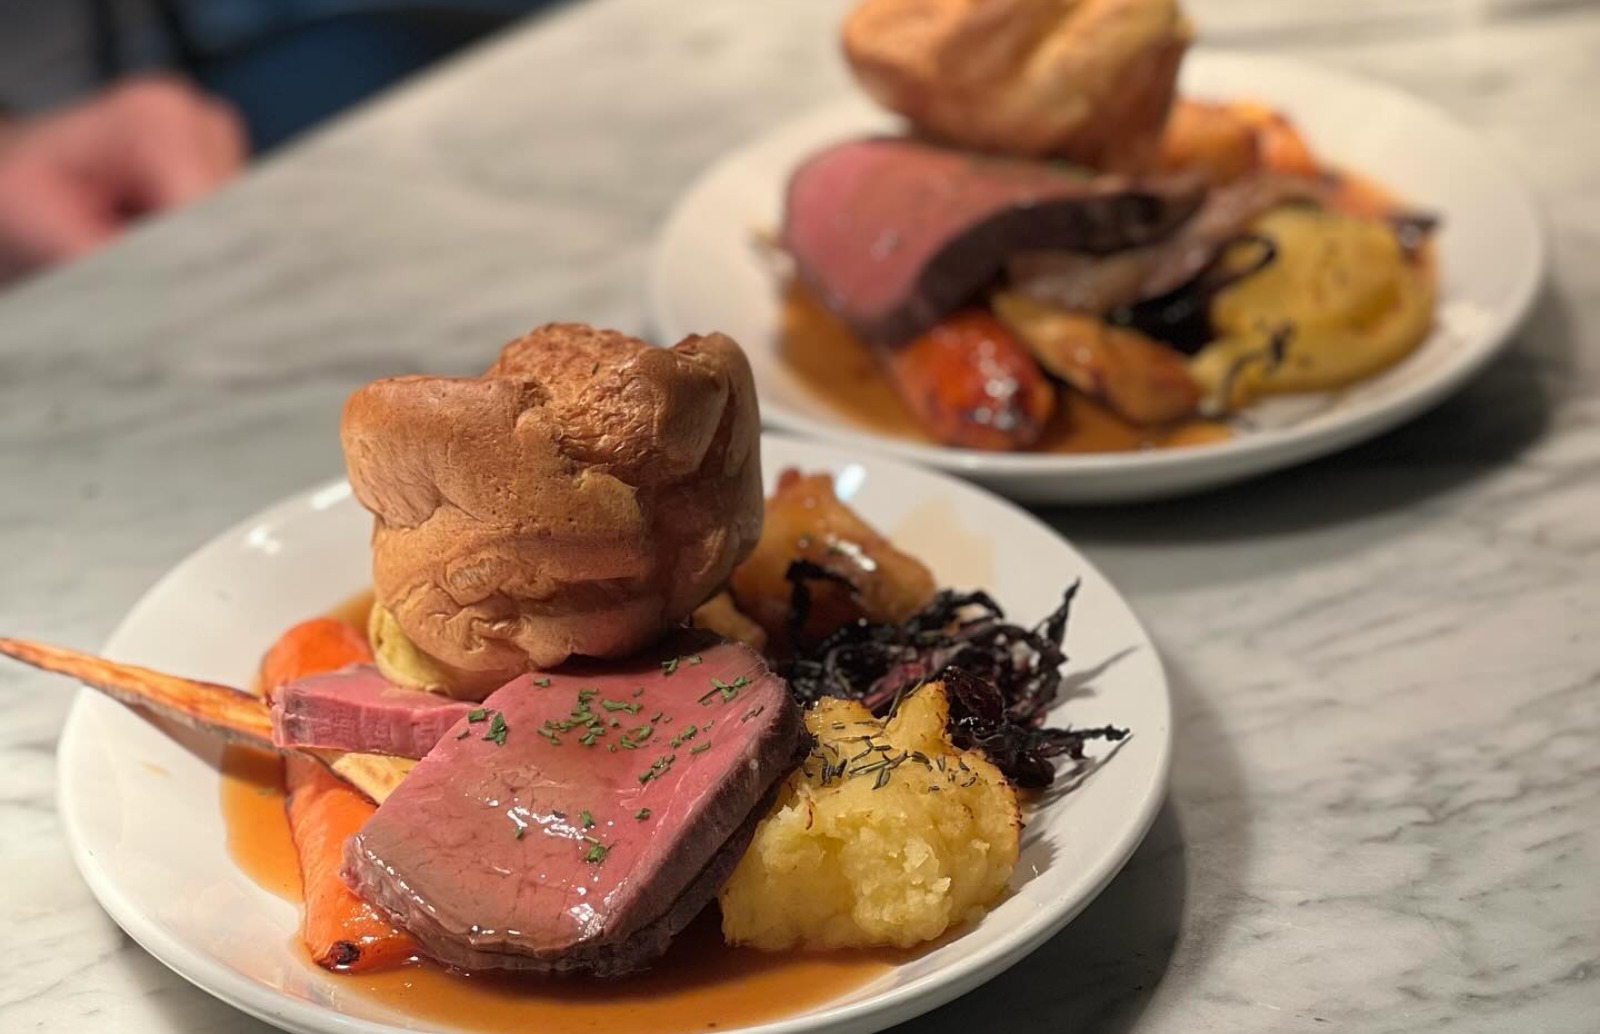 Two plates both with roast beef and all the trimmings including Yorkshire puddings, roasted vegetables and red cabbage.